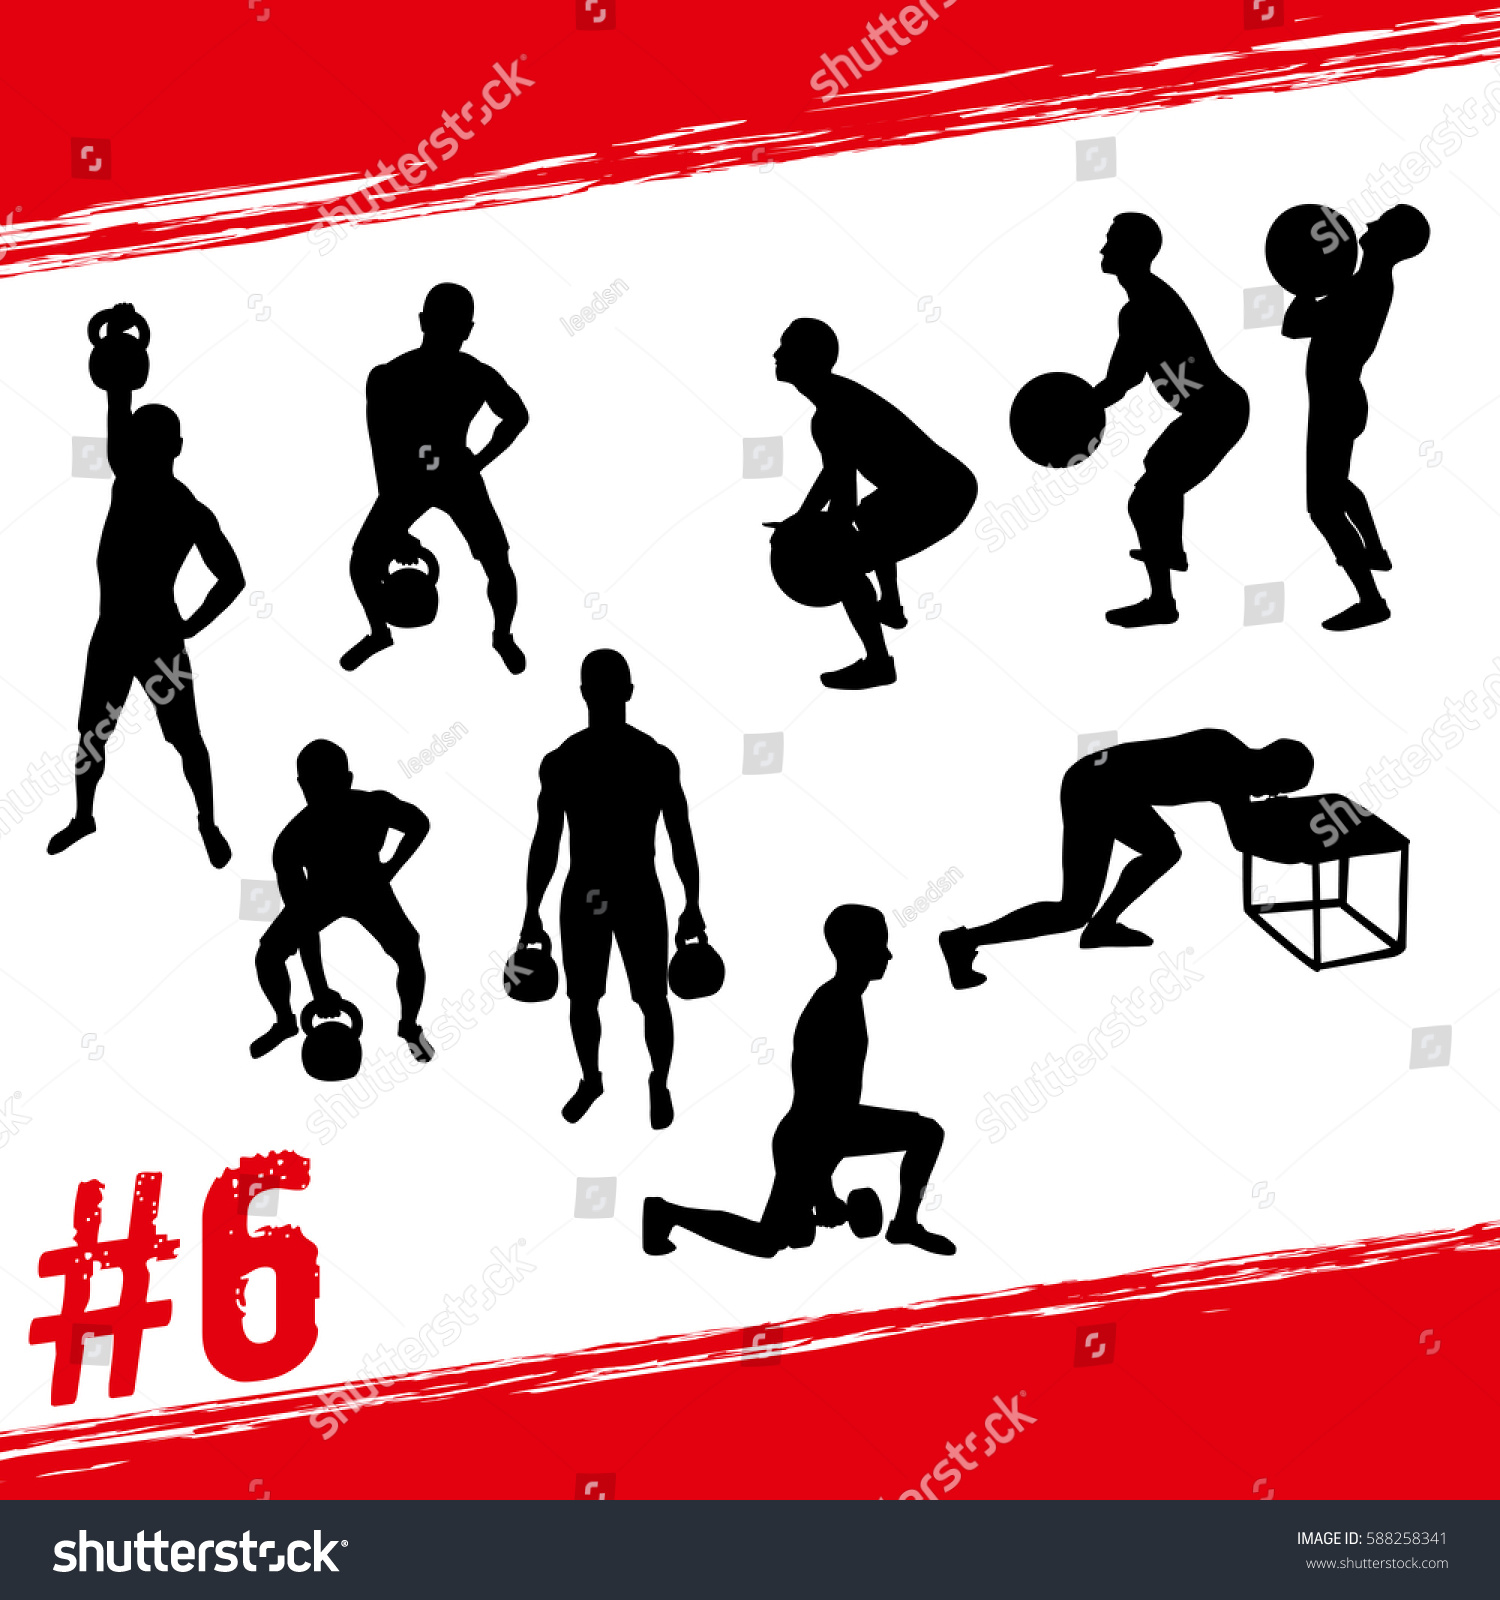 SVG of Crossfit concept. Vector silhouettes of people doing fitness and crossfit workouts in many different position. Active and healthy life concept svg